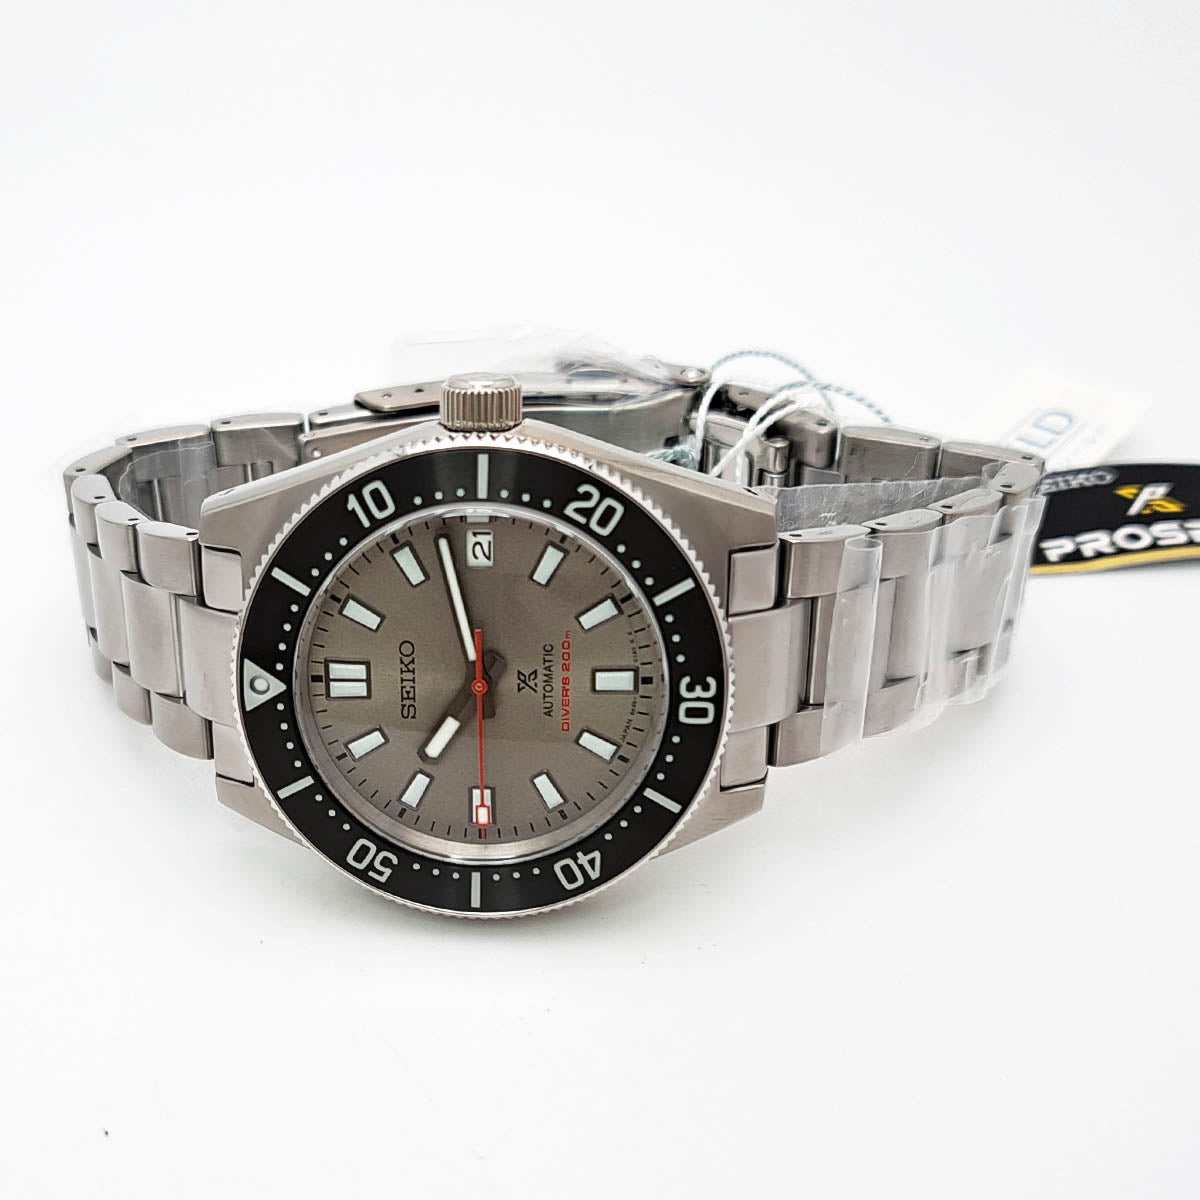 Seiko "Prospex Diver Shohei Ohtani Limited Modified SBDC191" Men's Automatic Wristwatch in Stainless Steel SBDC191